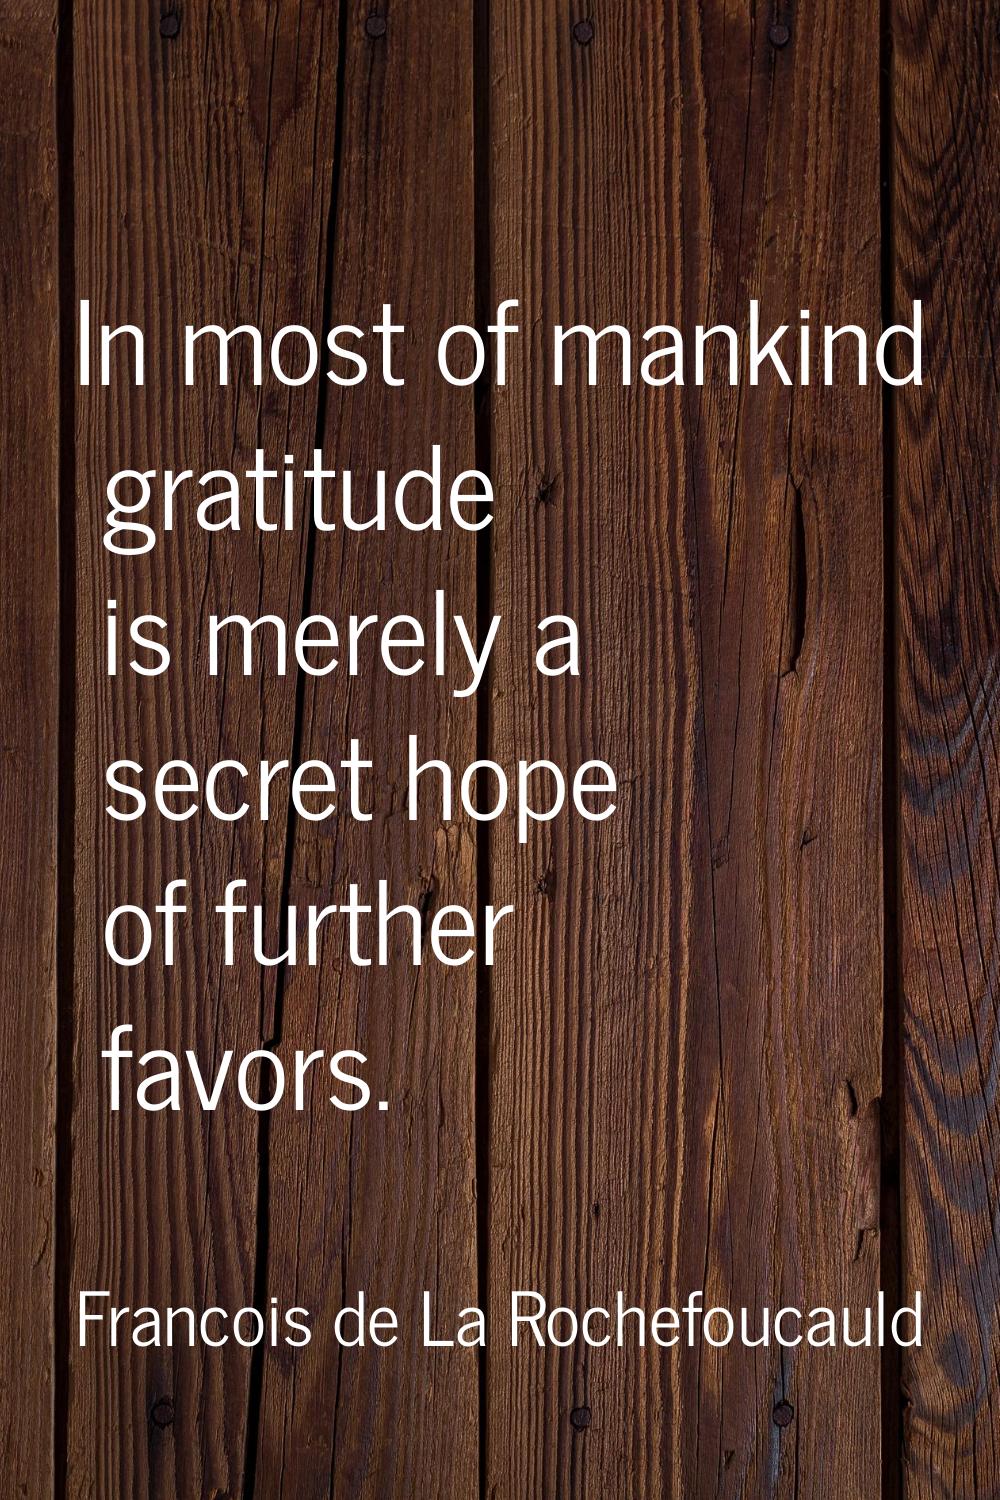 In most of mankind gratitude is merely a secret hope of further favors.